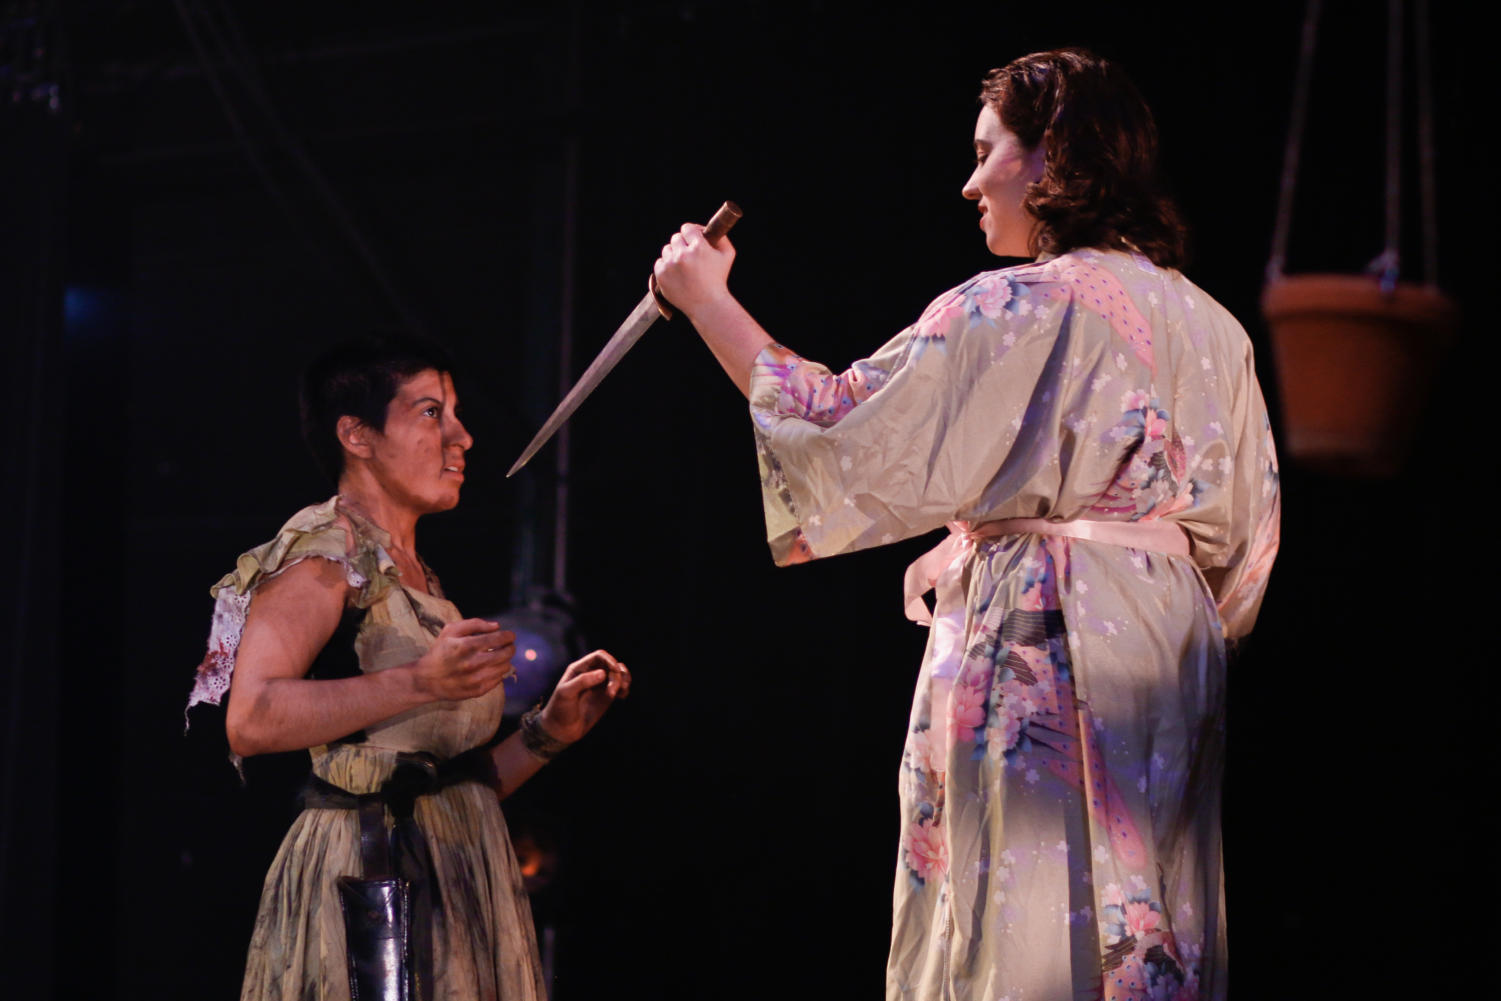 Electra faces off against her mother Clytemnestra (played by fourth-year Amelia Soth).